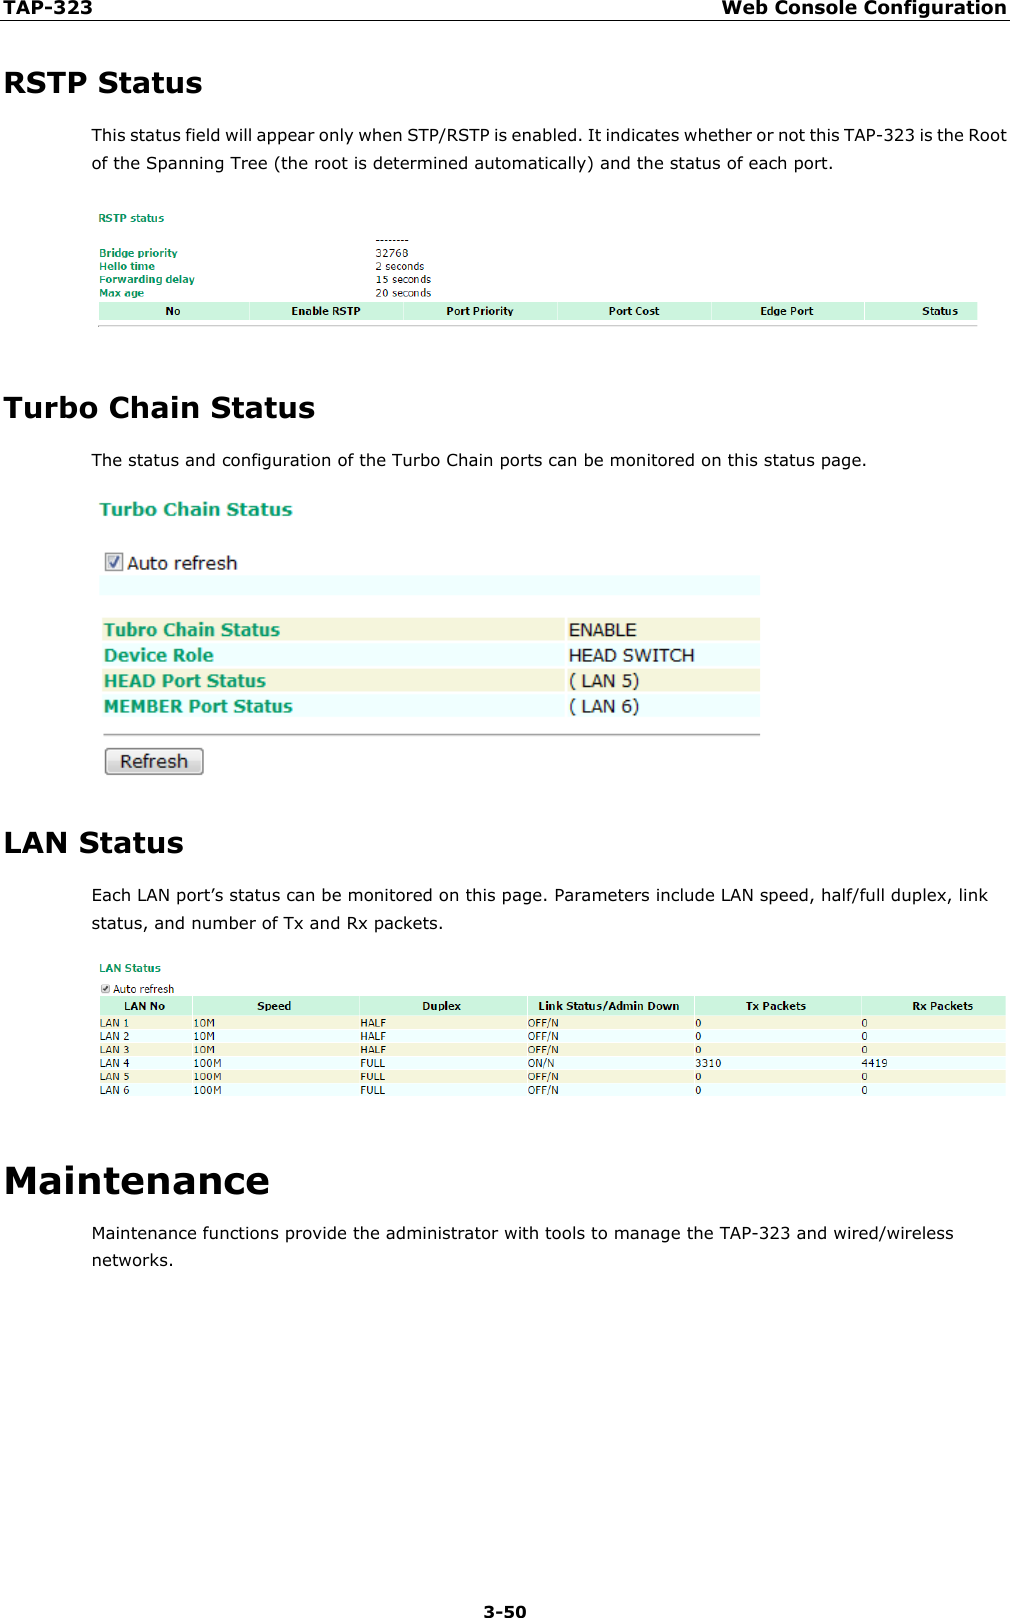 TAP-323 Web Console Configuration  3-50 RSTP Status This status field will appear only when STP/RSTP is enabled. It indicates whether or not this TAP-323 is the Root of the Spanning Tree (the root is determined automatically) and the status of each port.  Turbo Chain Status The status and configuration of the Turbo Chain ports can be monitored on this status page.  LAN Status Each LAN port’s status can be monitored on this page. Parameters include LAN speed, half/full duplex, link status, and number of Tx and Rx packets.  Maintenance Maintenance functions provide the administrator with tools to manage the TAP-323 and wired/wireless networks.     